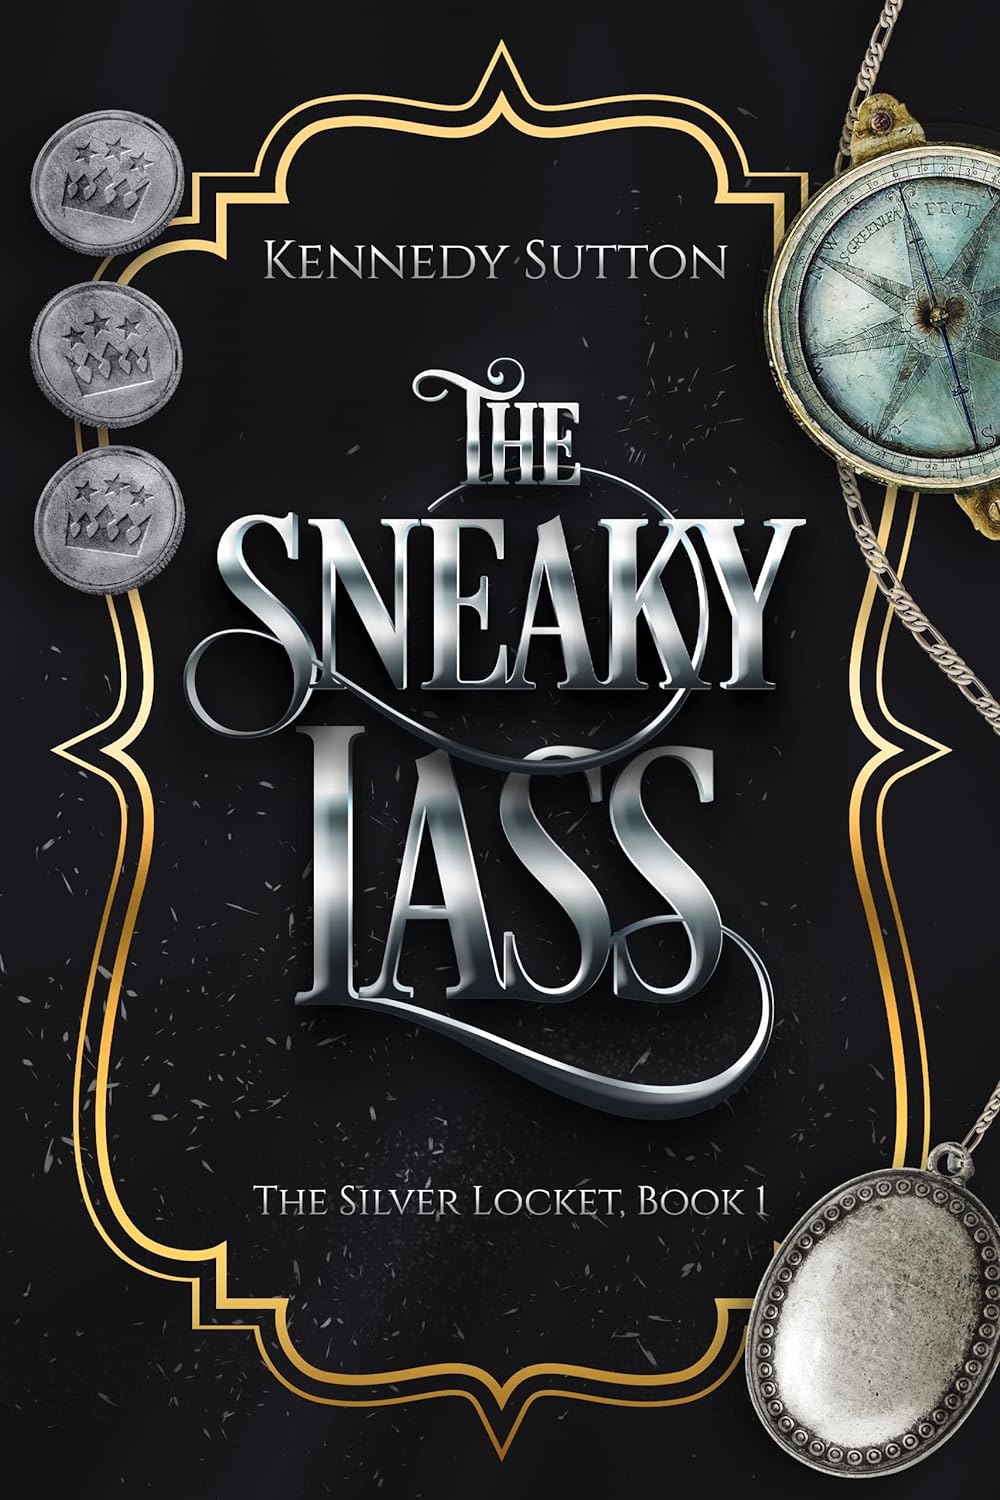 The Sneaky Lass (The Silver Locket Book 1) by Kennedy Sutton